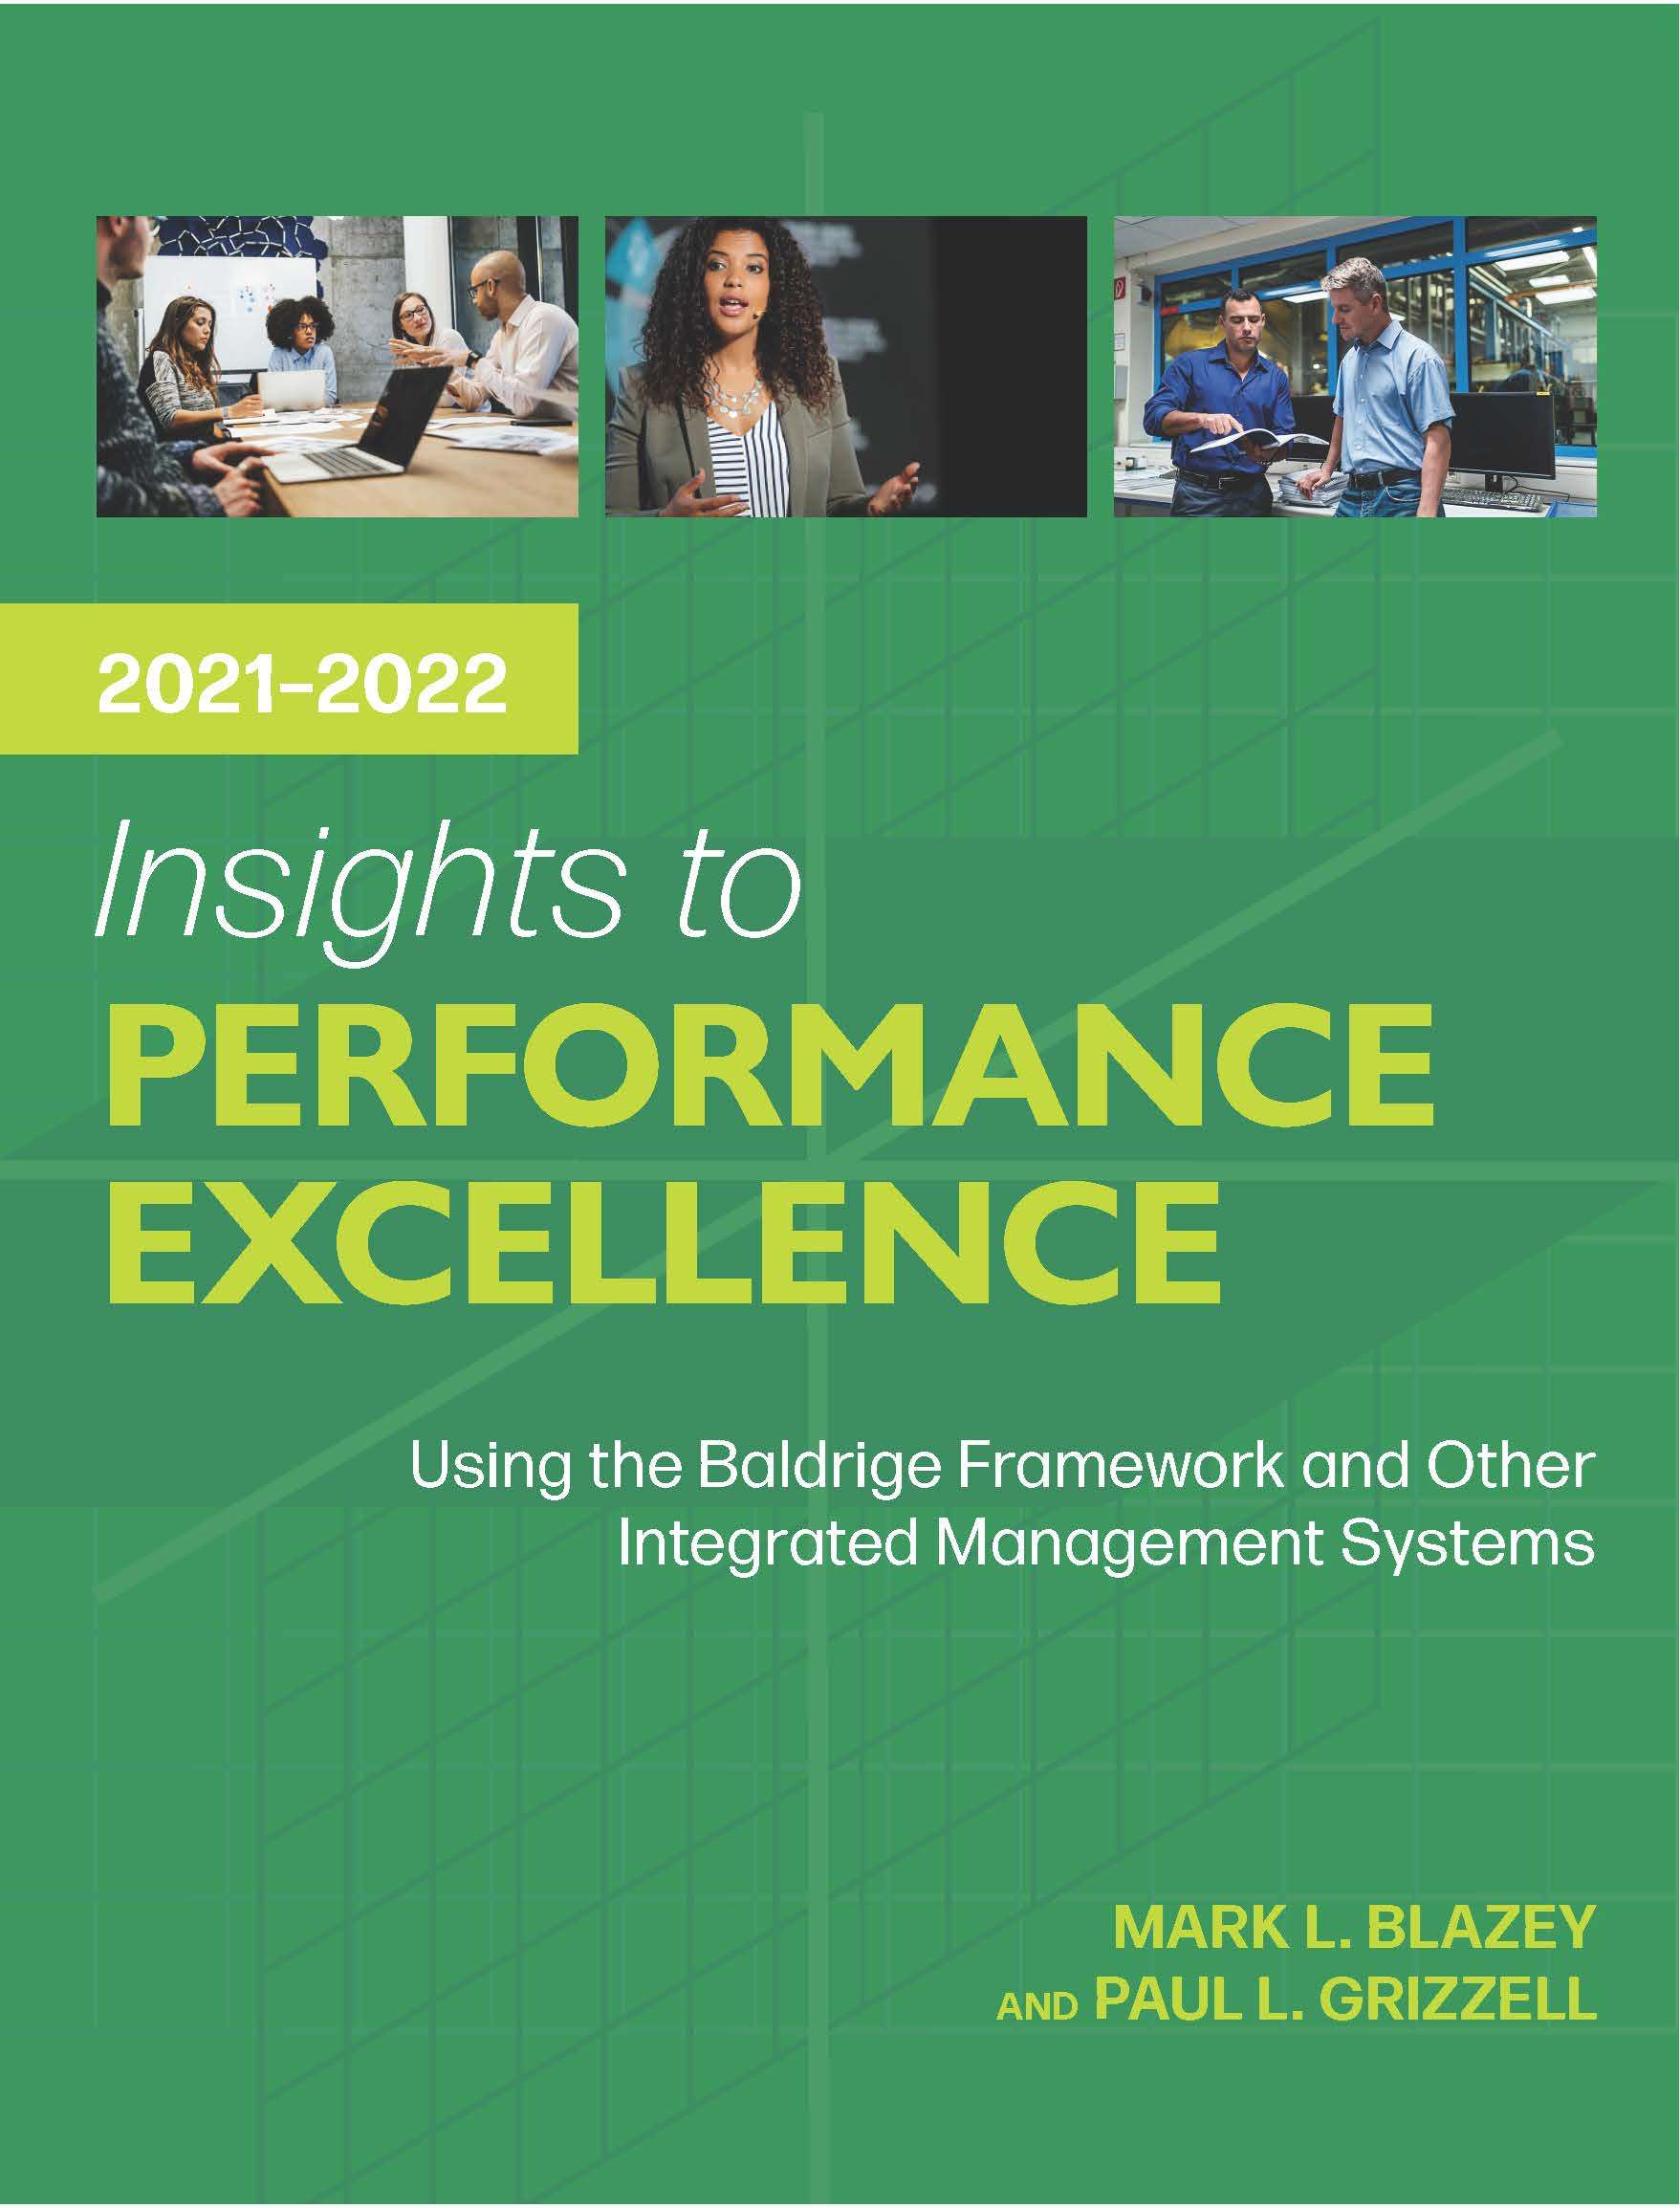 H1587 Insights to Performance Excellence 2021-2022